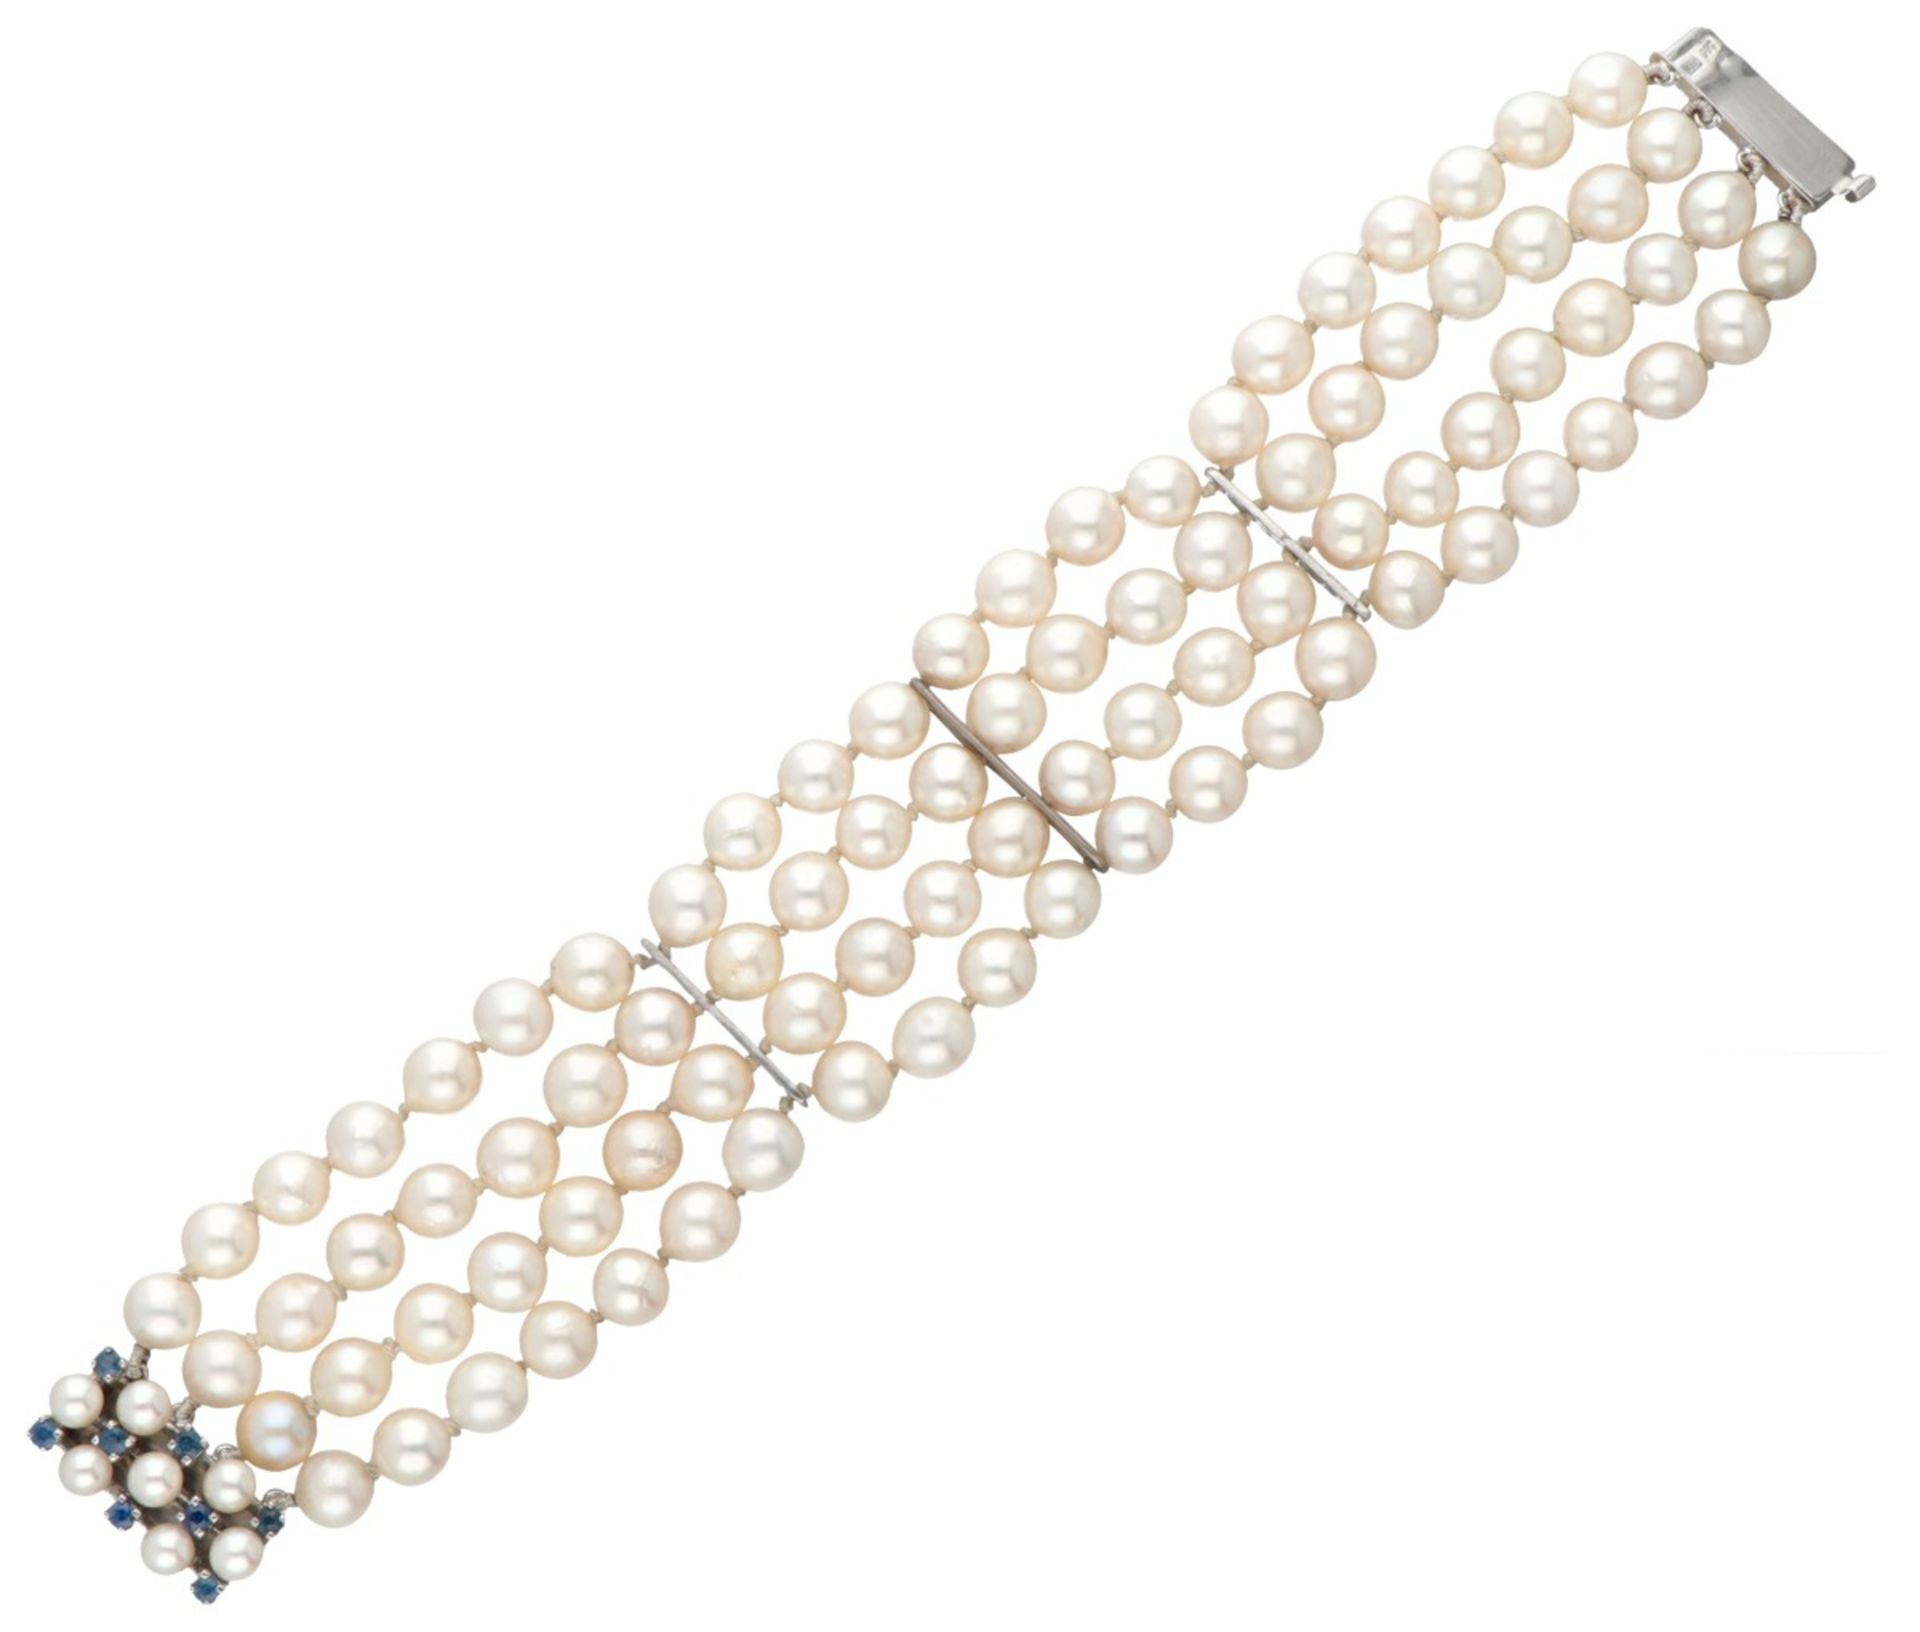 Vintage four-row freshwater pearl bracelet with a 14K. white gold closure set with natural sapphire  - Image 2 of 4